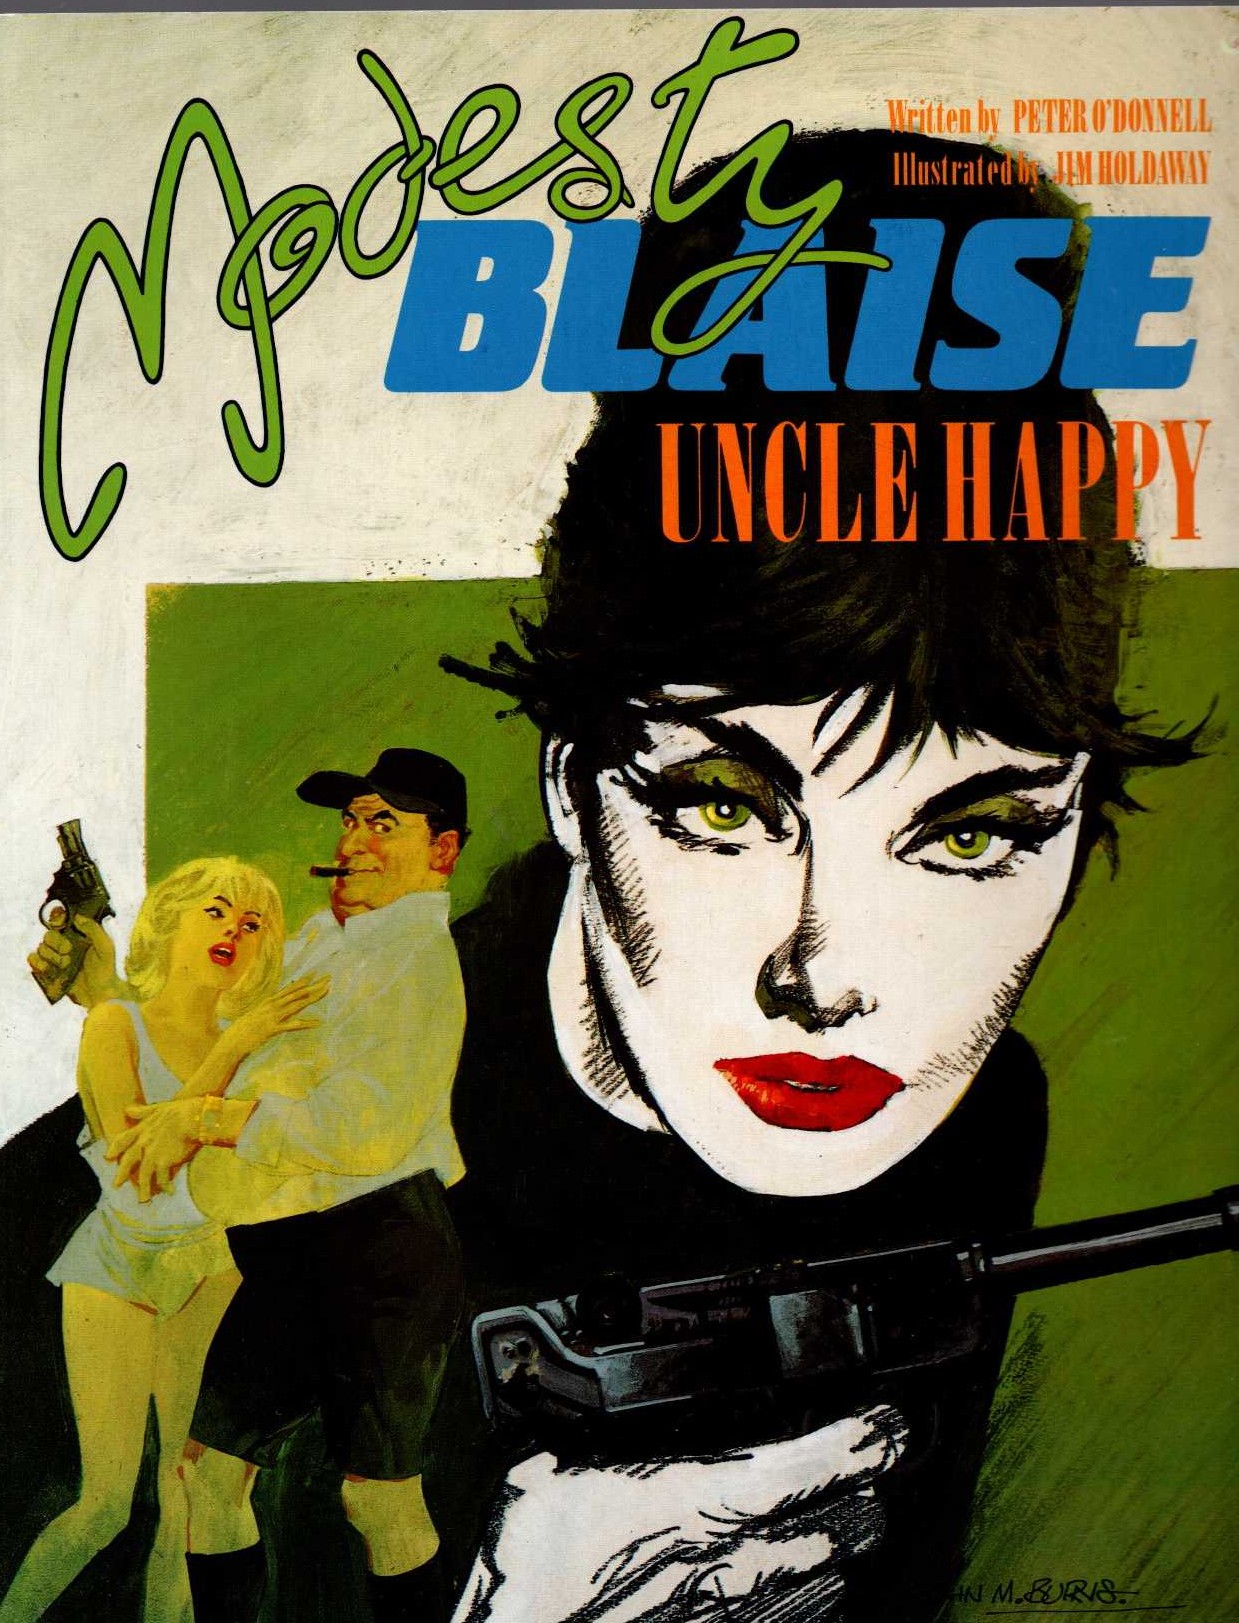 Peter O'Donnell  MODESTY BLAISE: UNCLE HAPPY front book cover image